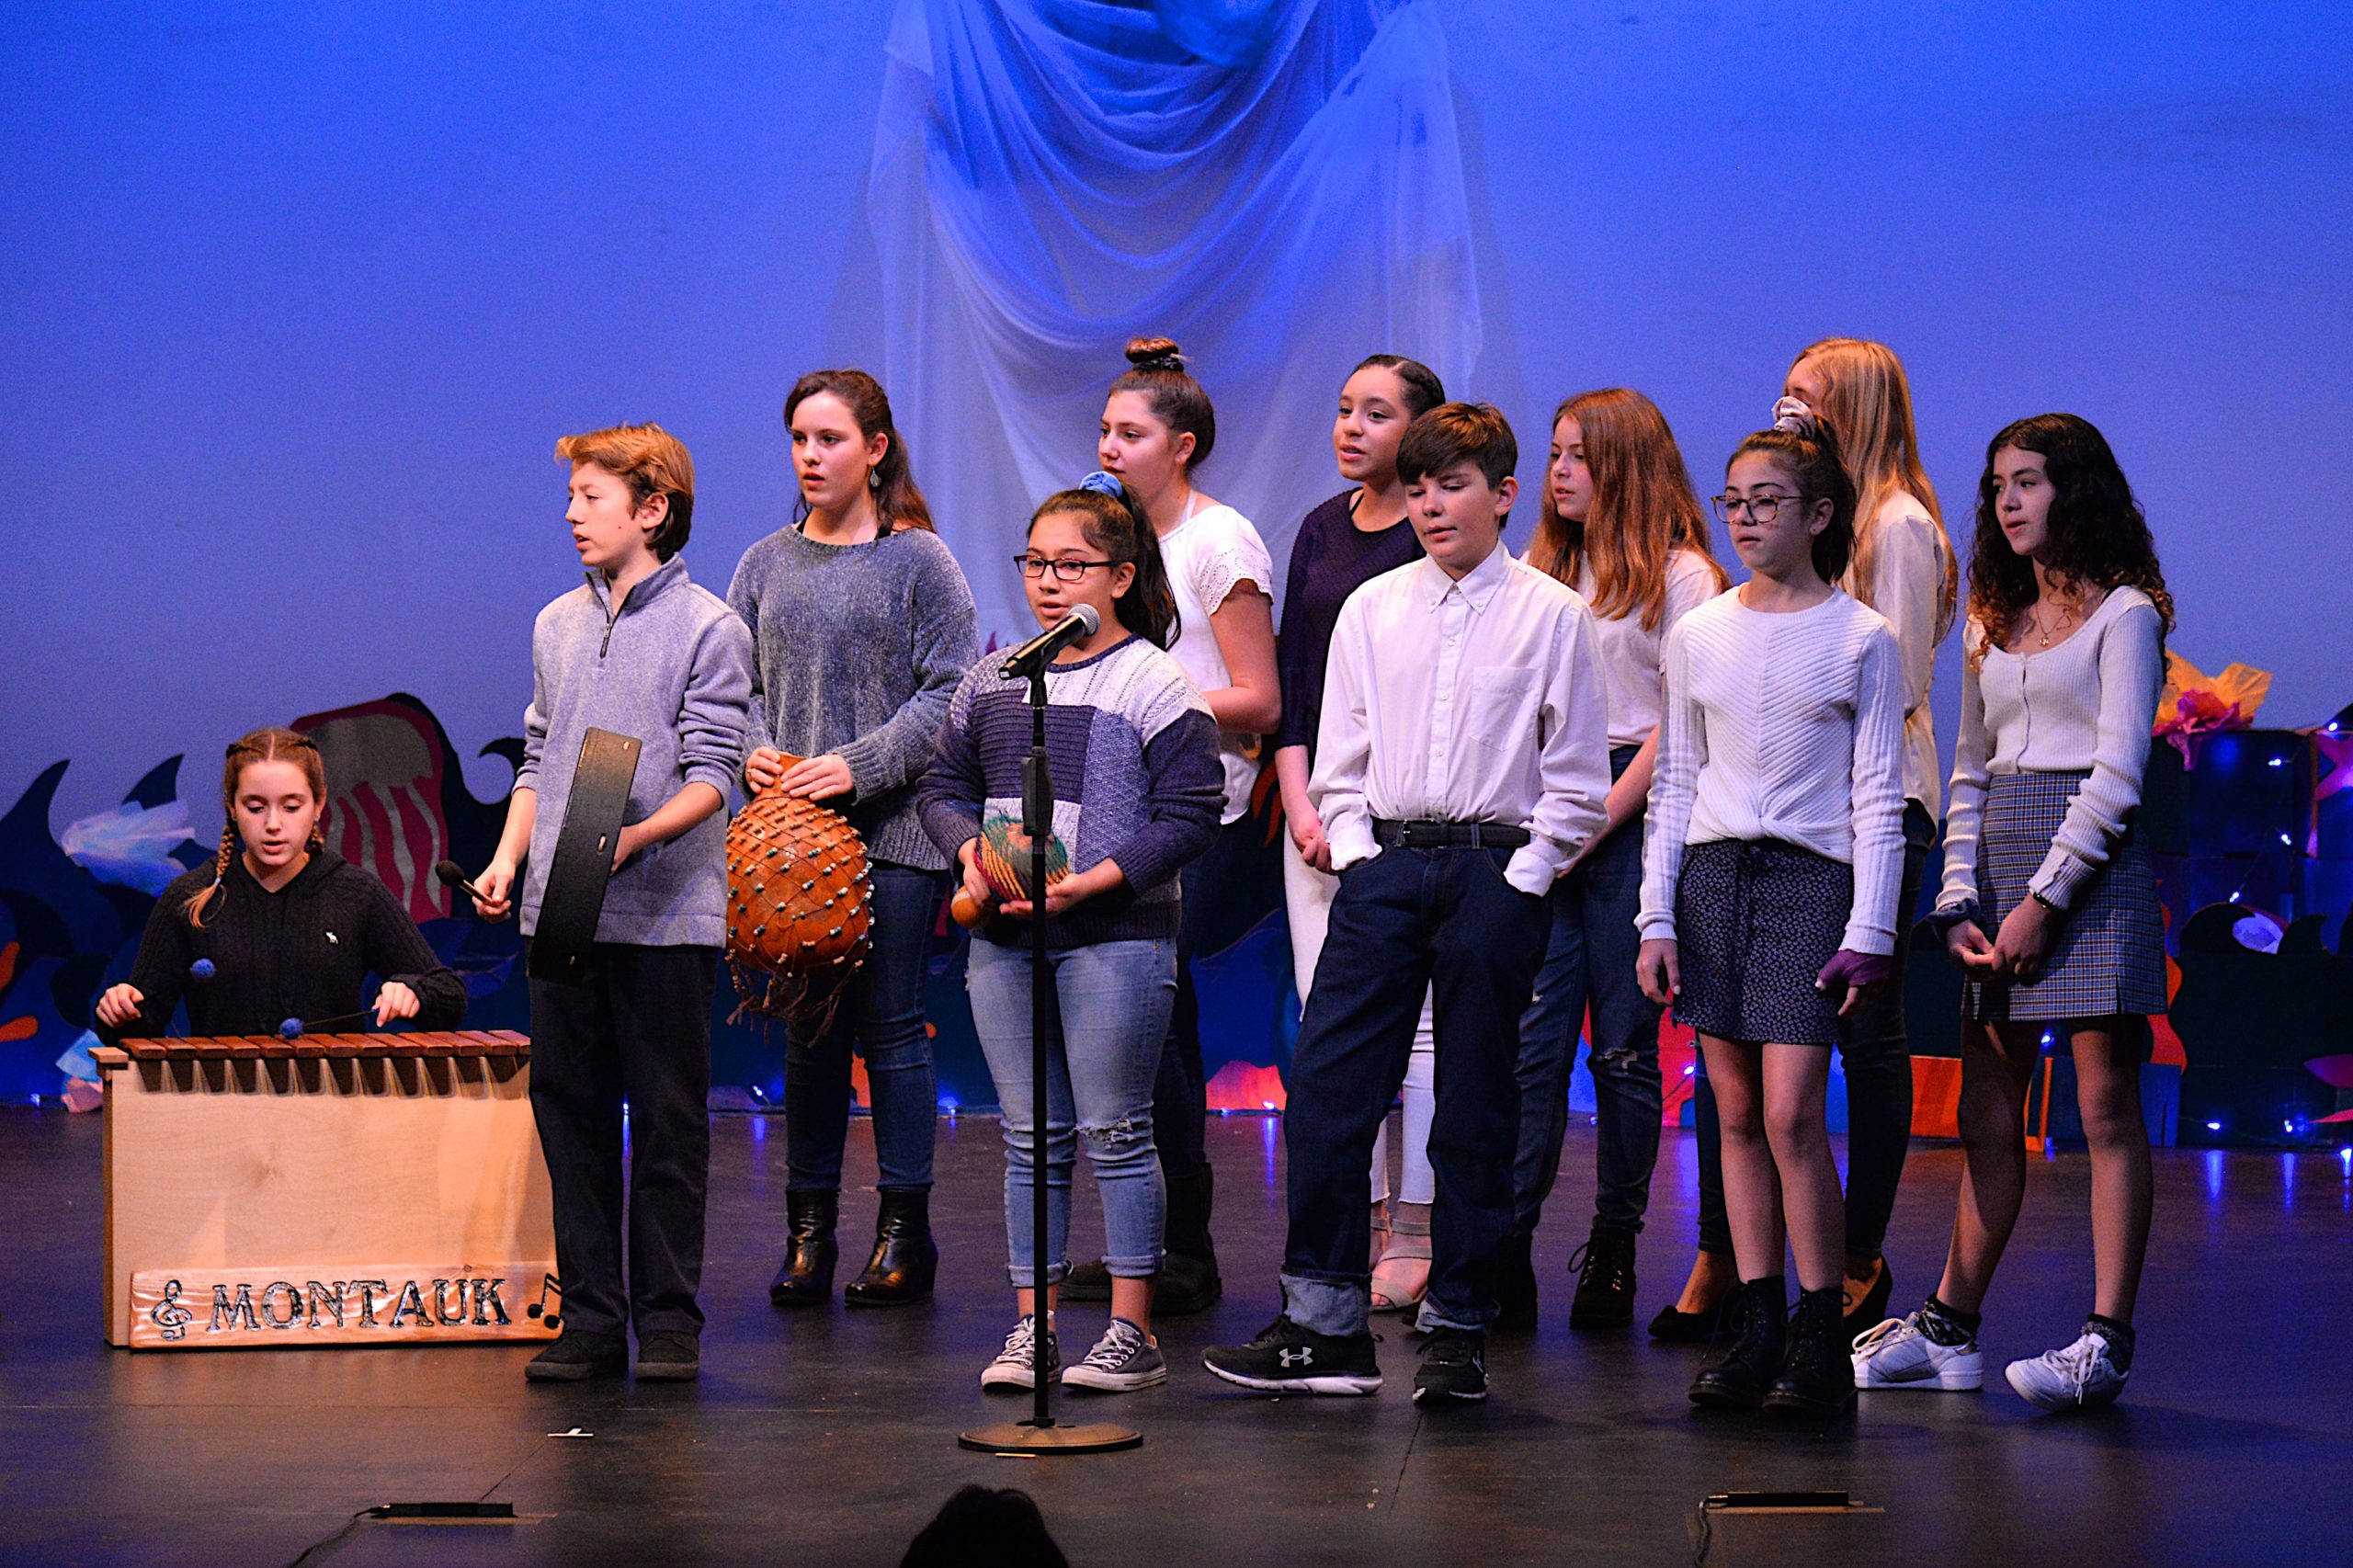 The Student Arts Festival opened at Guild Hall on Saturday with a reception. The Montauk School chorus performed. KYRIL BROMLEY